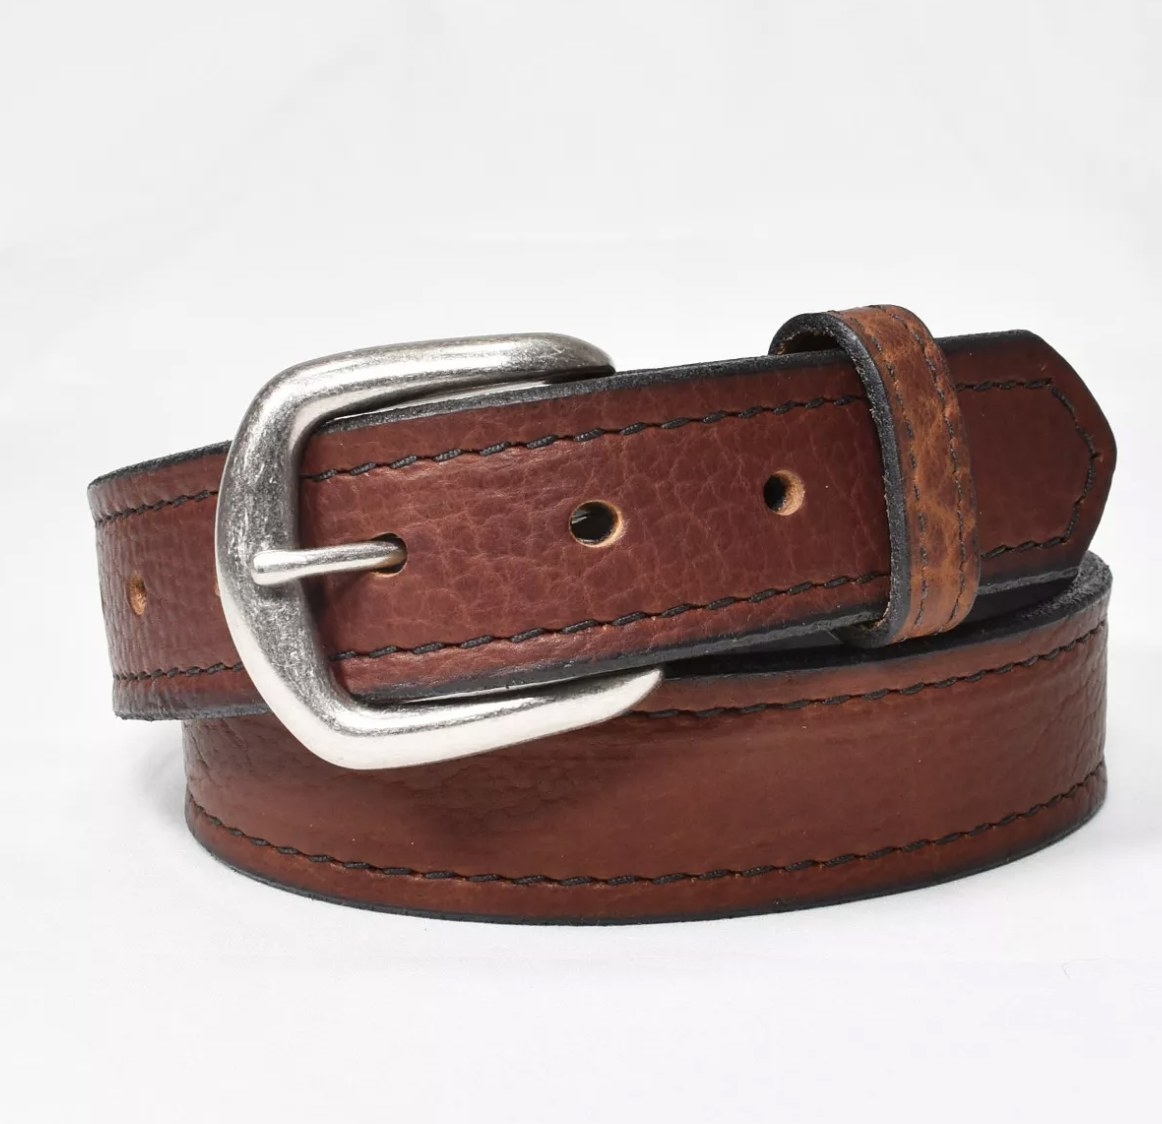 The brown leather belt is a rich brown with a satin nickel buckle